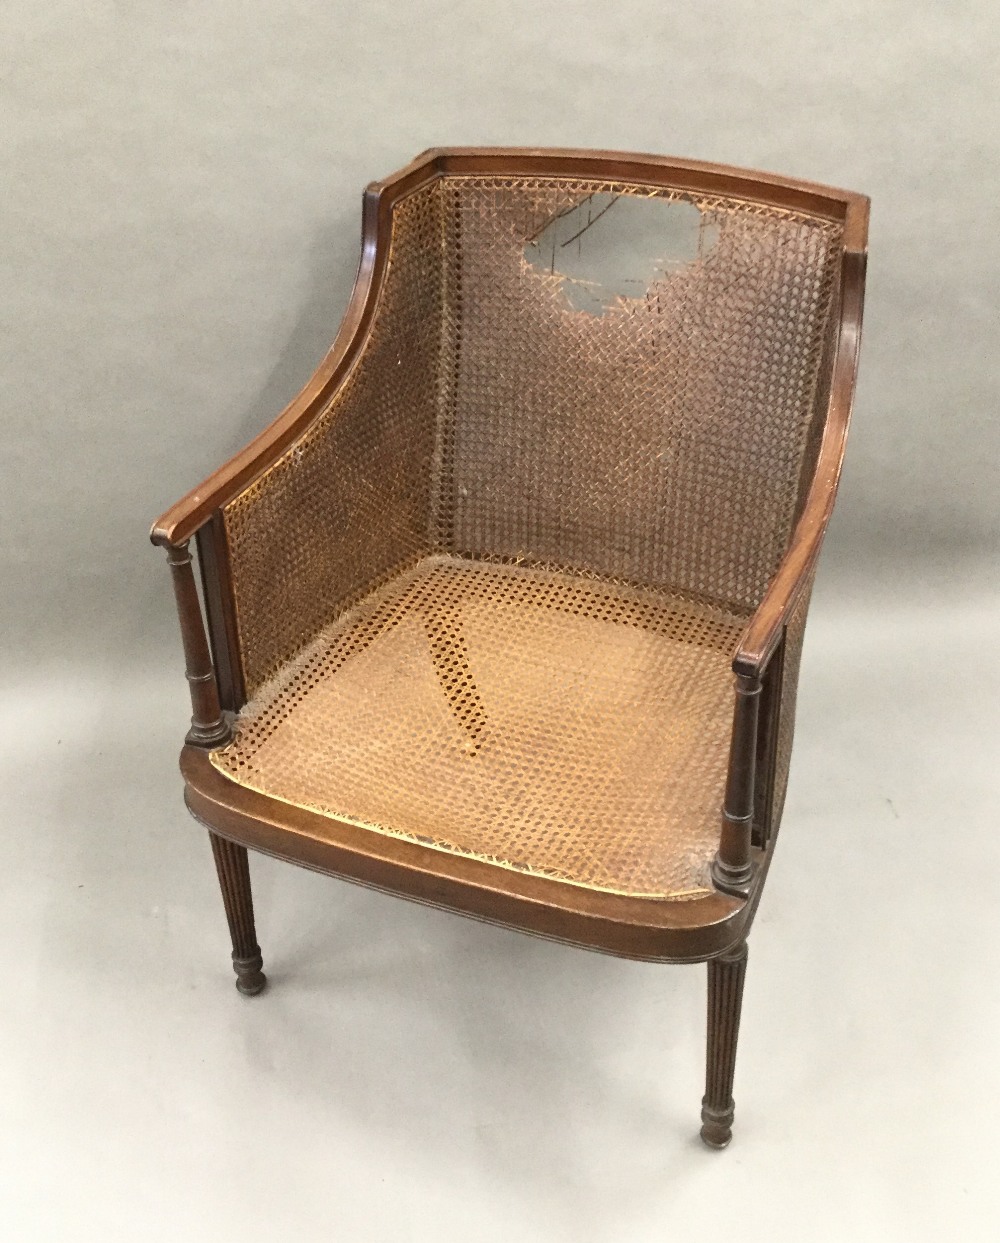 An early 20th century mahogany framed bergere chair - Image 4 of 4